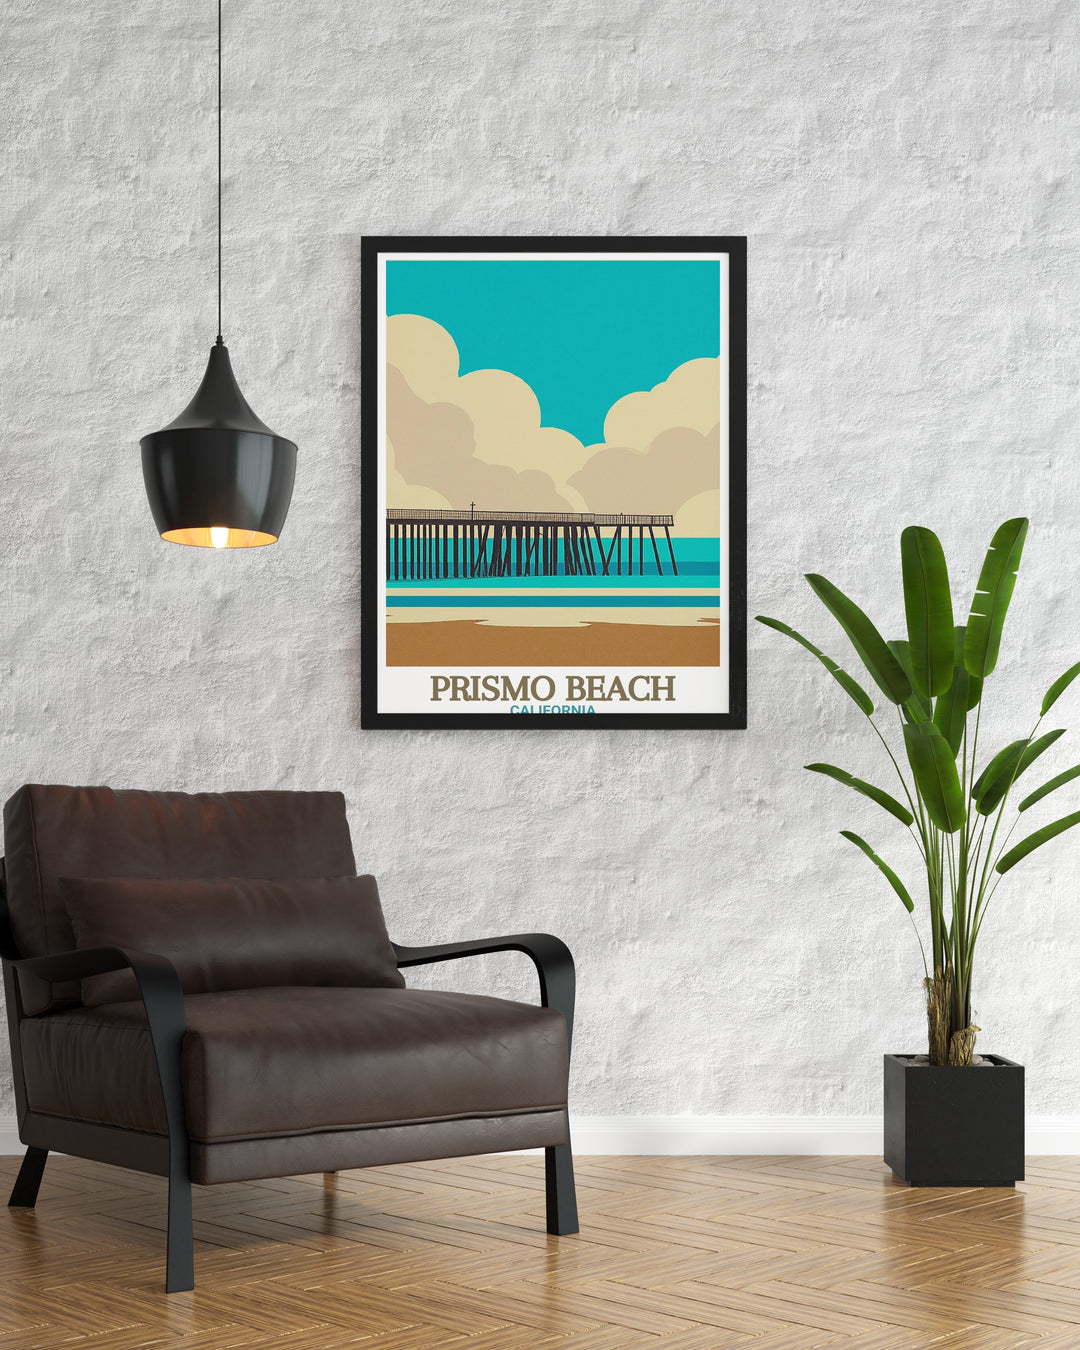 Pismo Beach Decor featuring vibrant California landscapes ideal for home or office decor Pismo Beach Pier modern decor pieces provide a serene and elegant touch